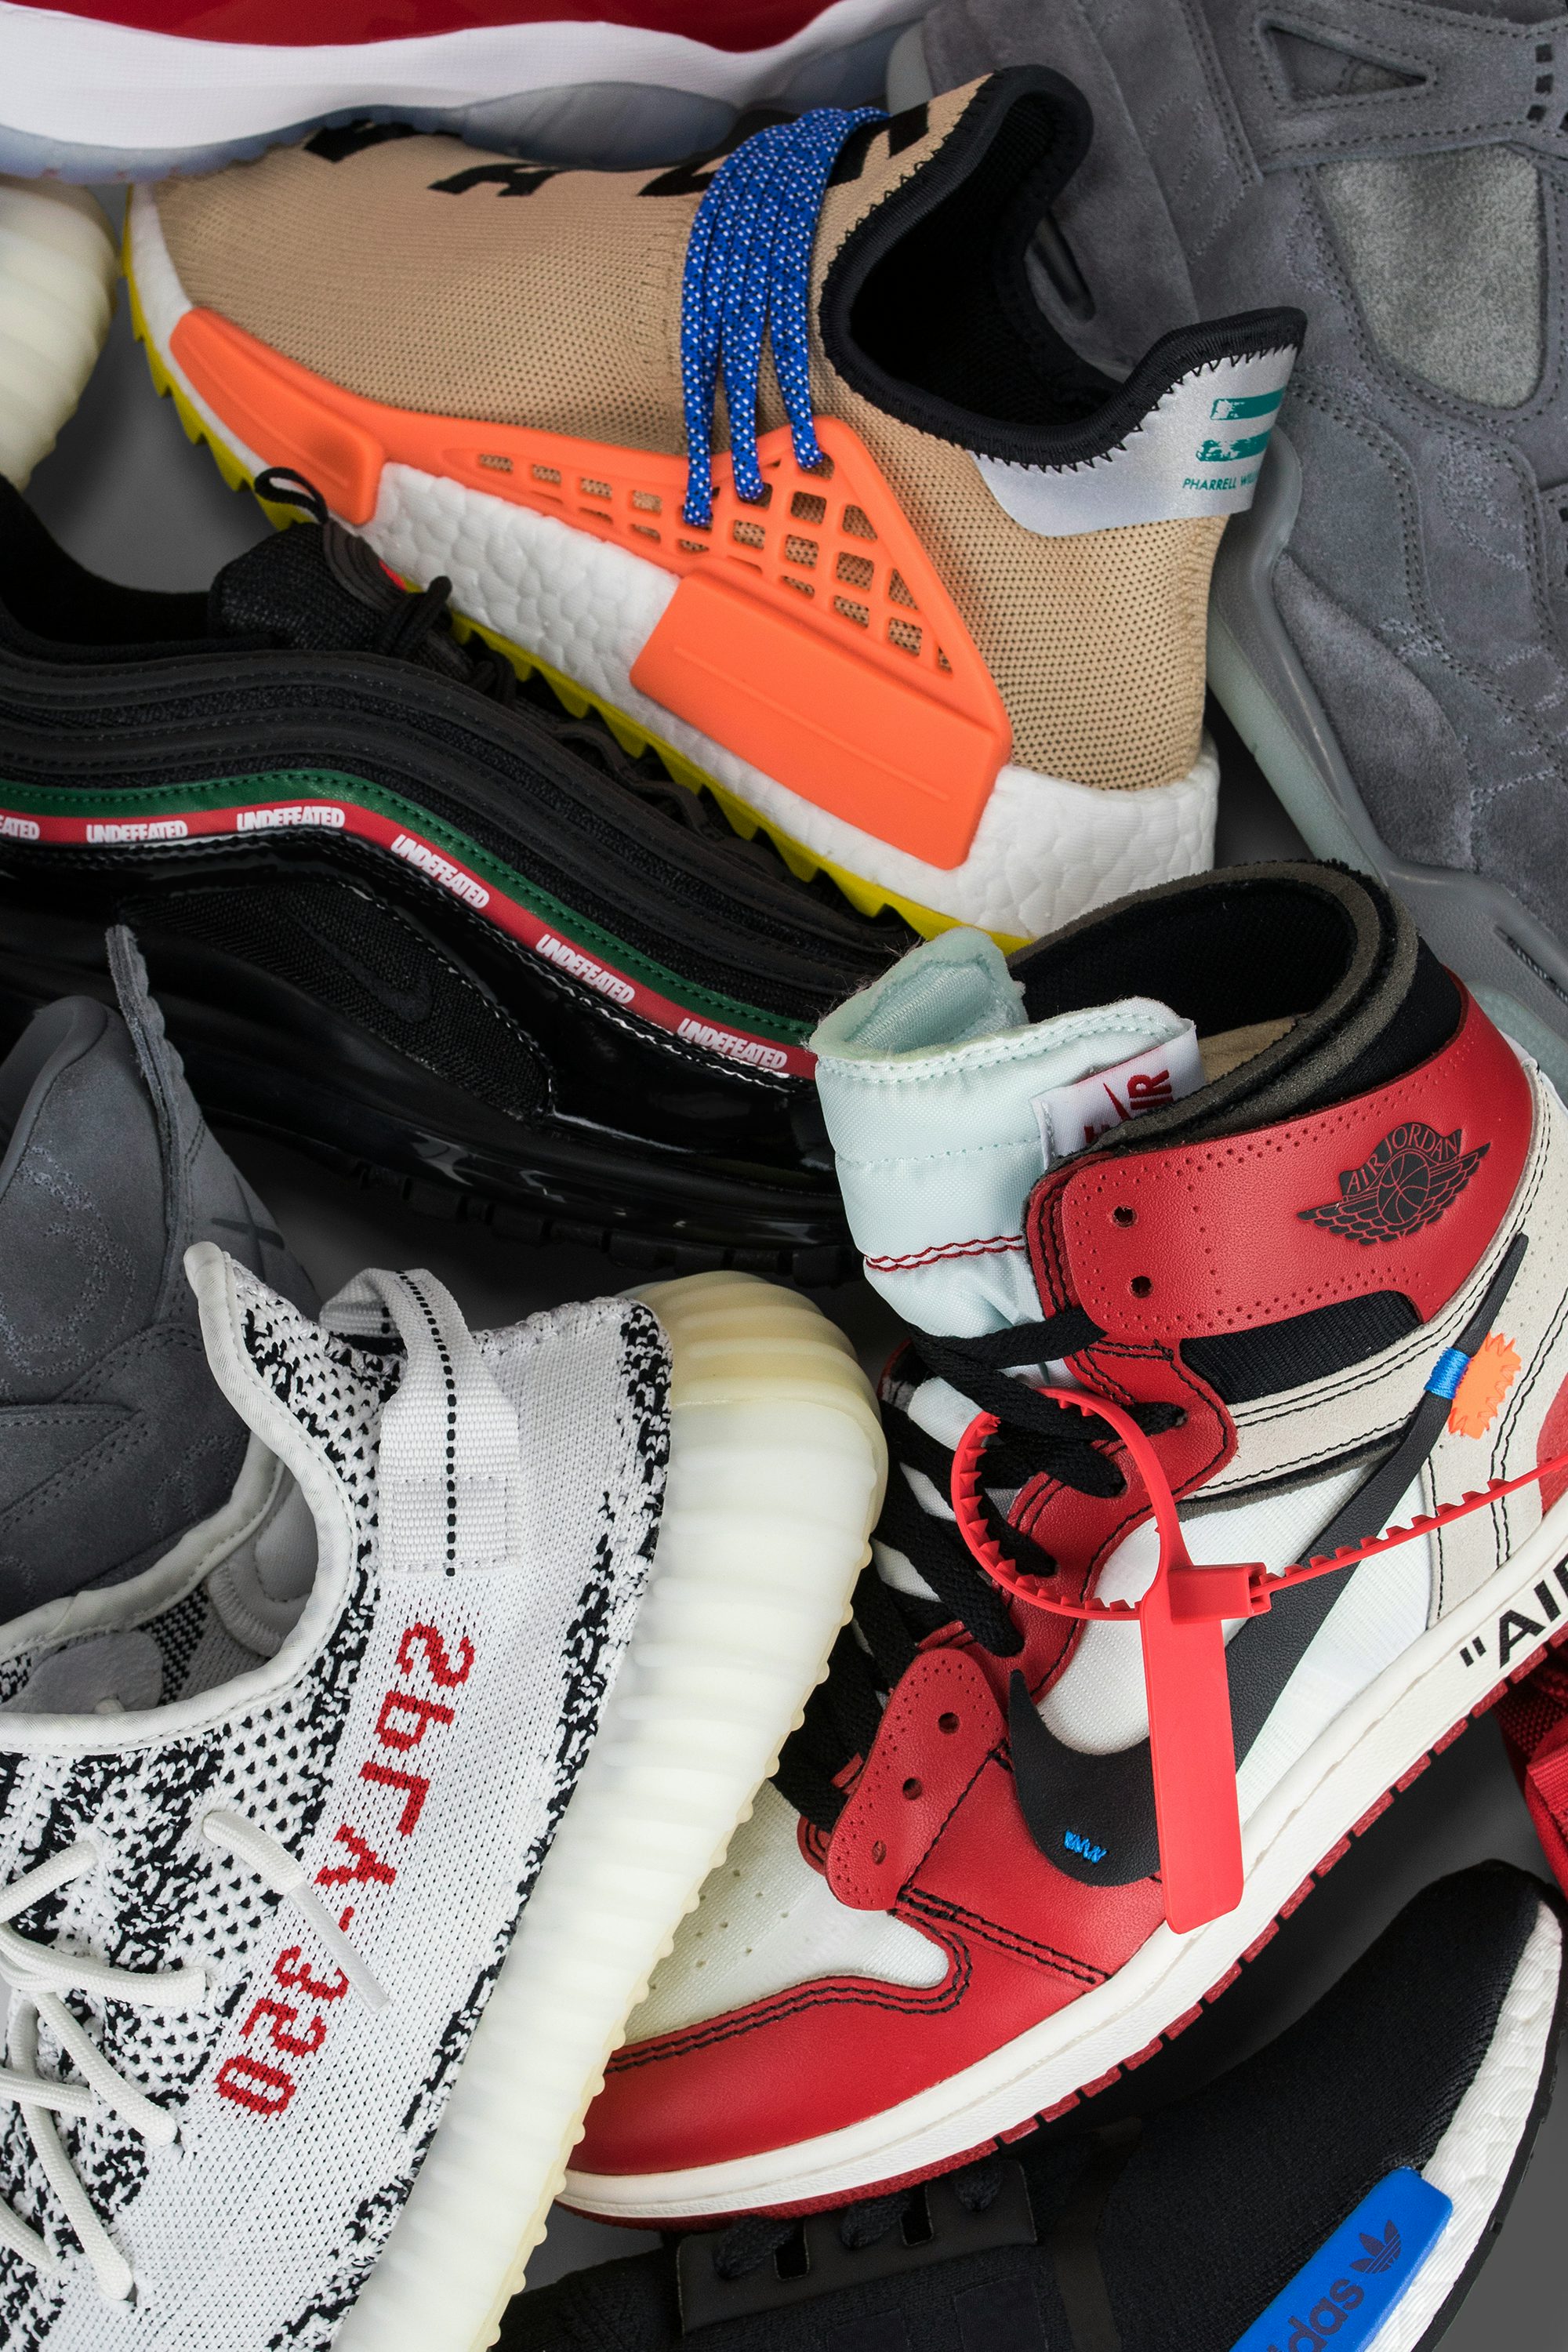 upcoming sneakers to resell